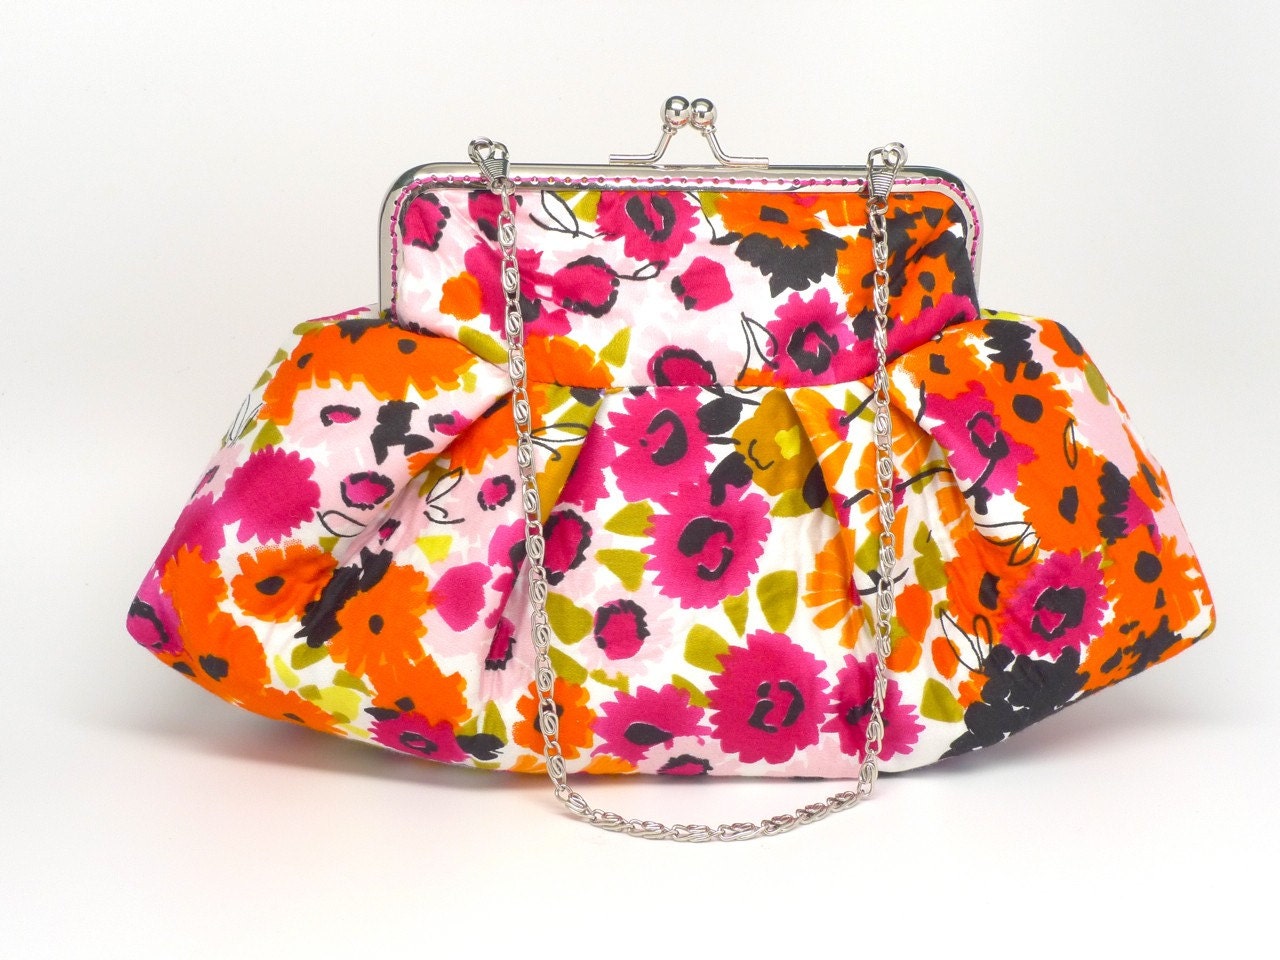 Cluth bag with colorful flowers printed silk